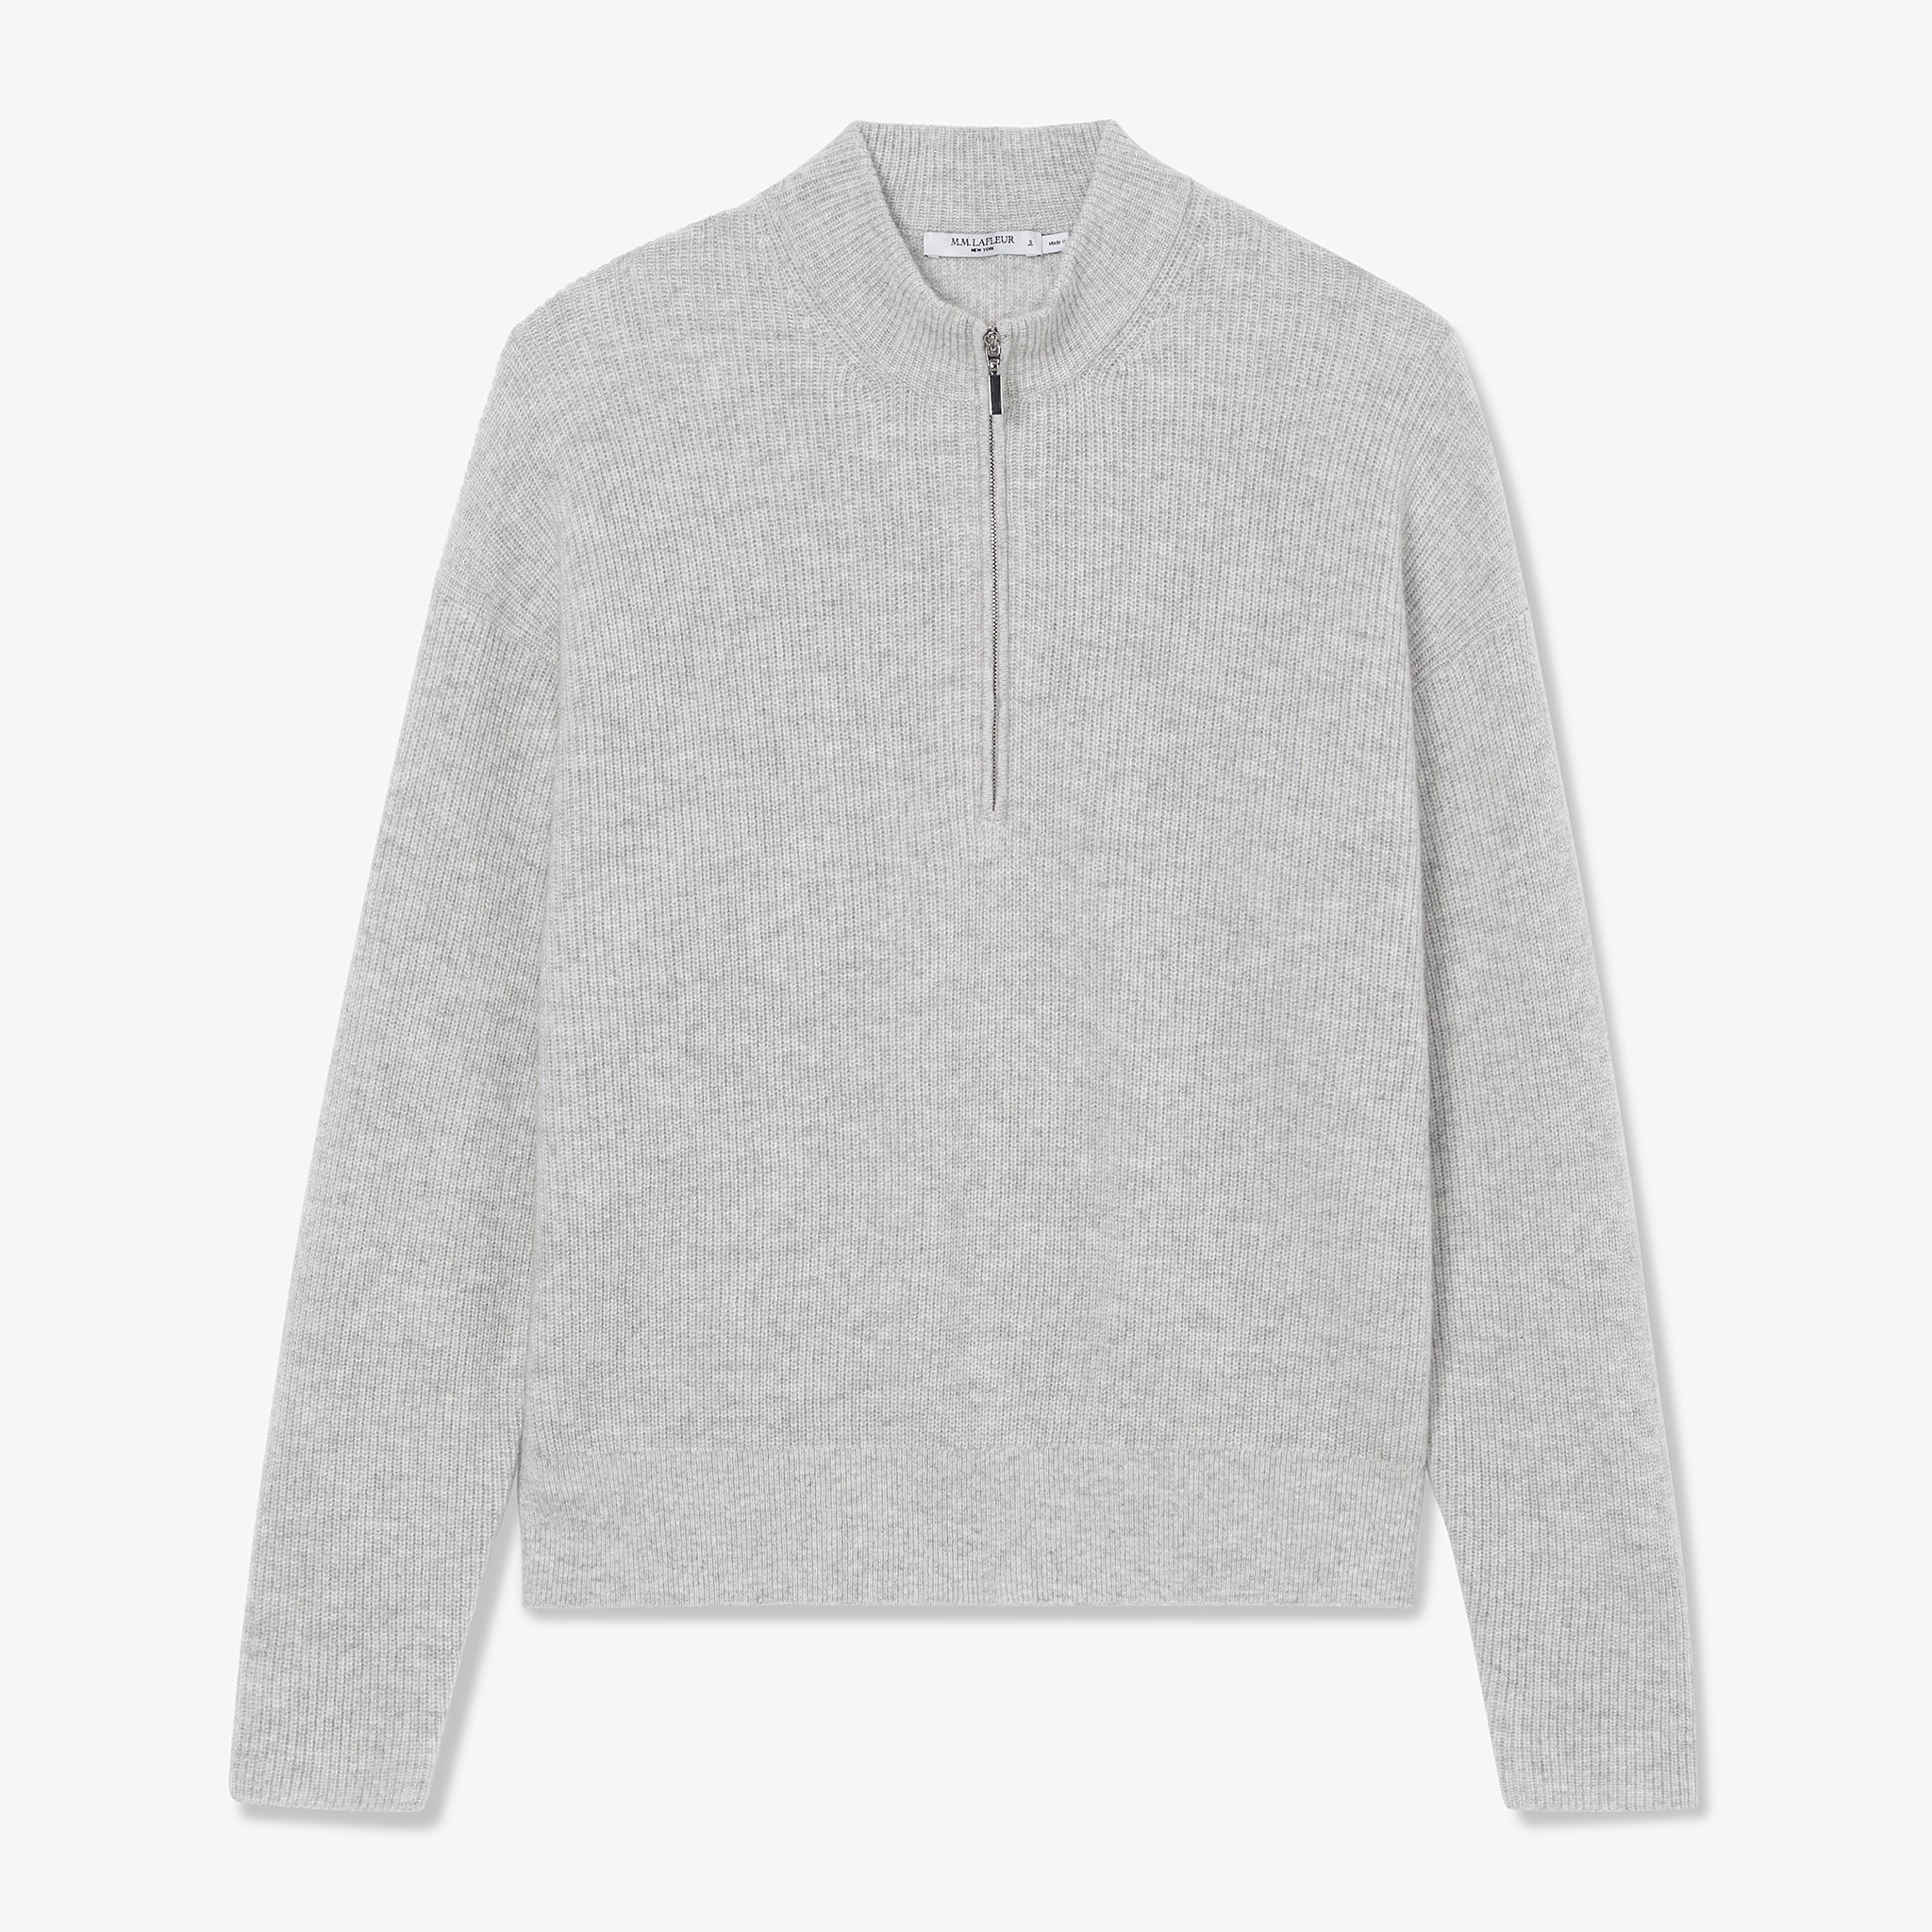 Packshot image of the cece sweater in light heather gray